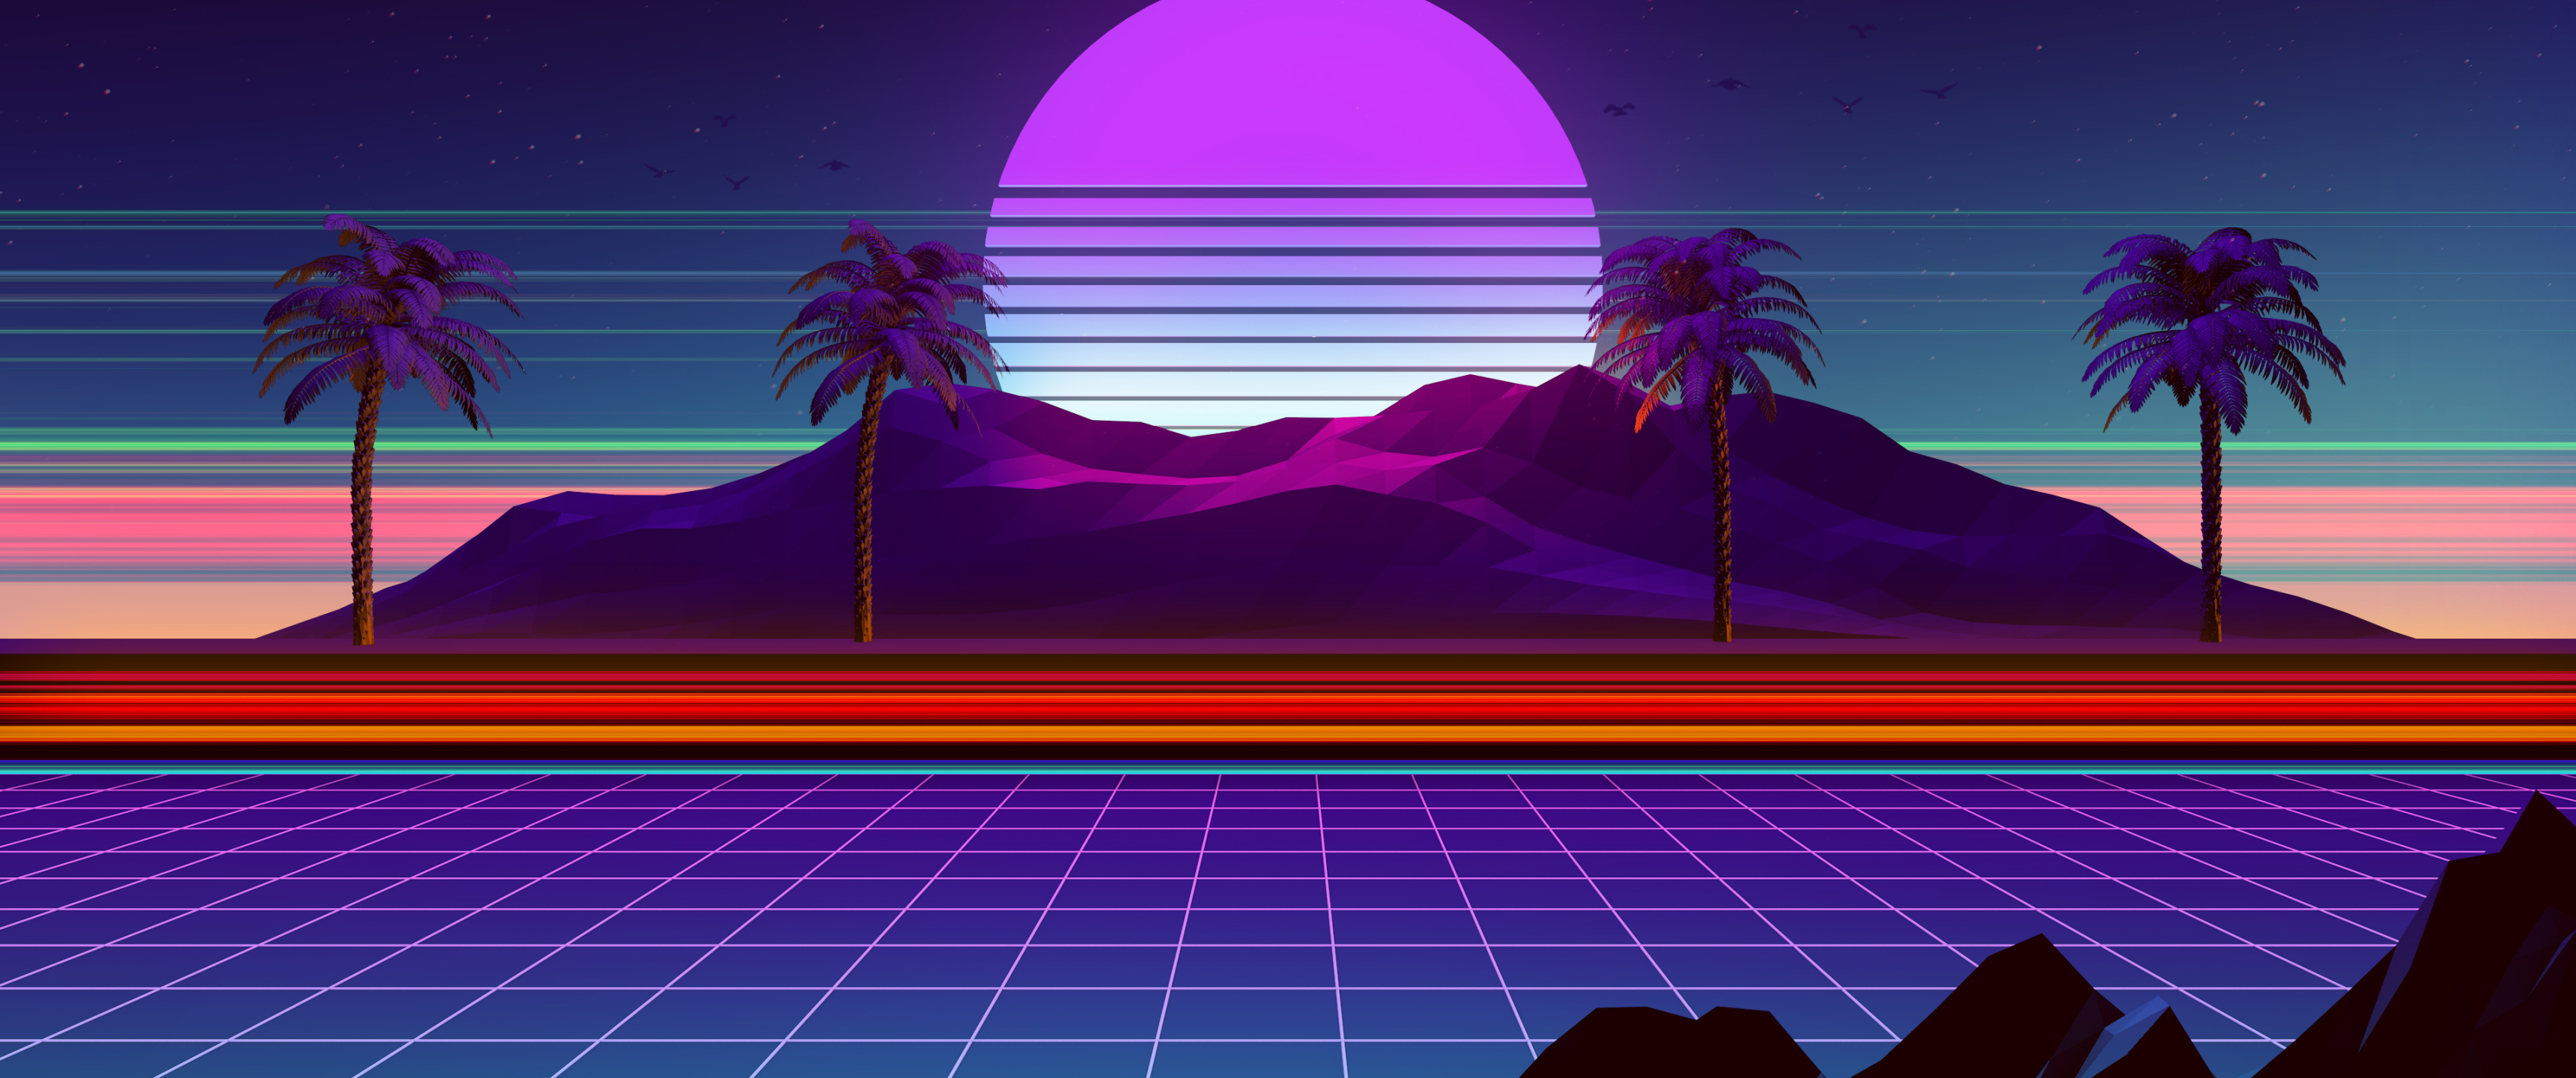 3440x1440 Synthwave And Retrowave